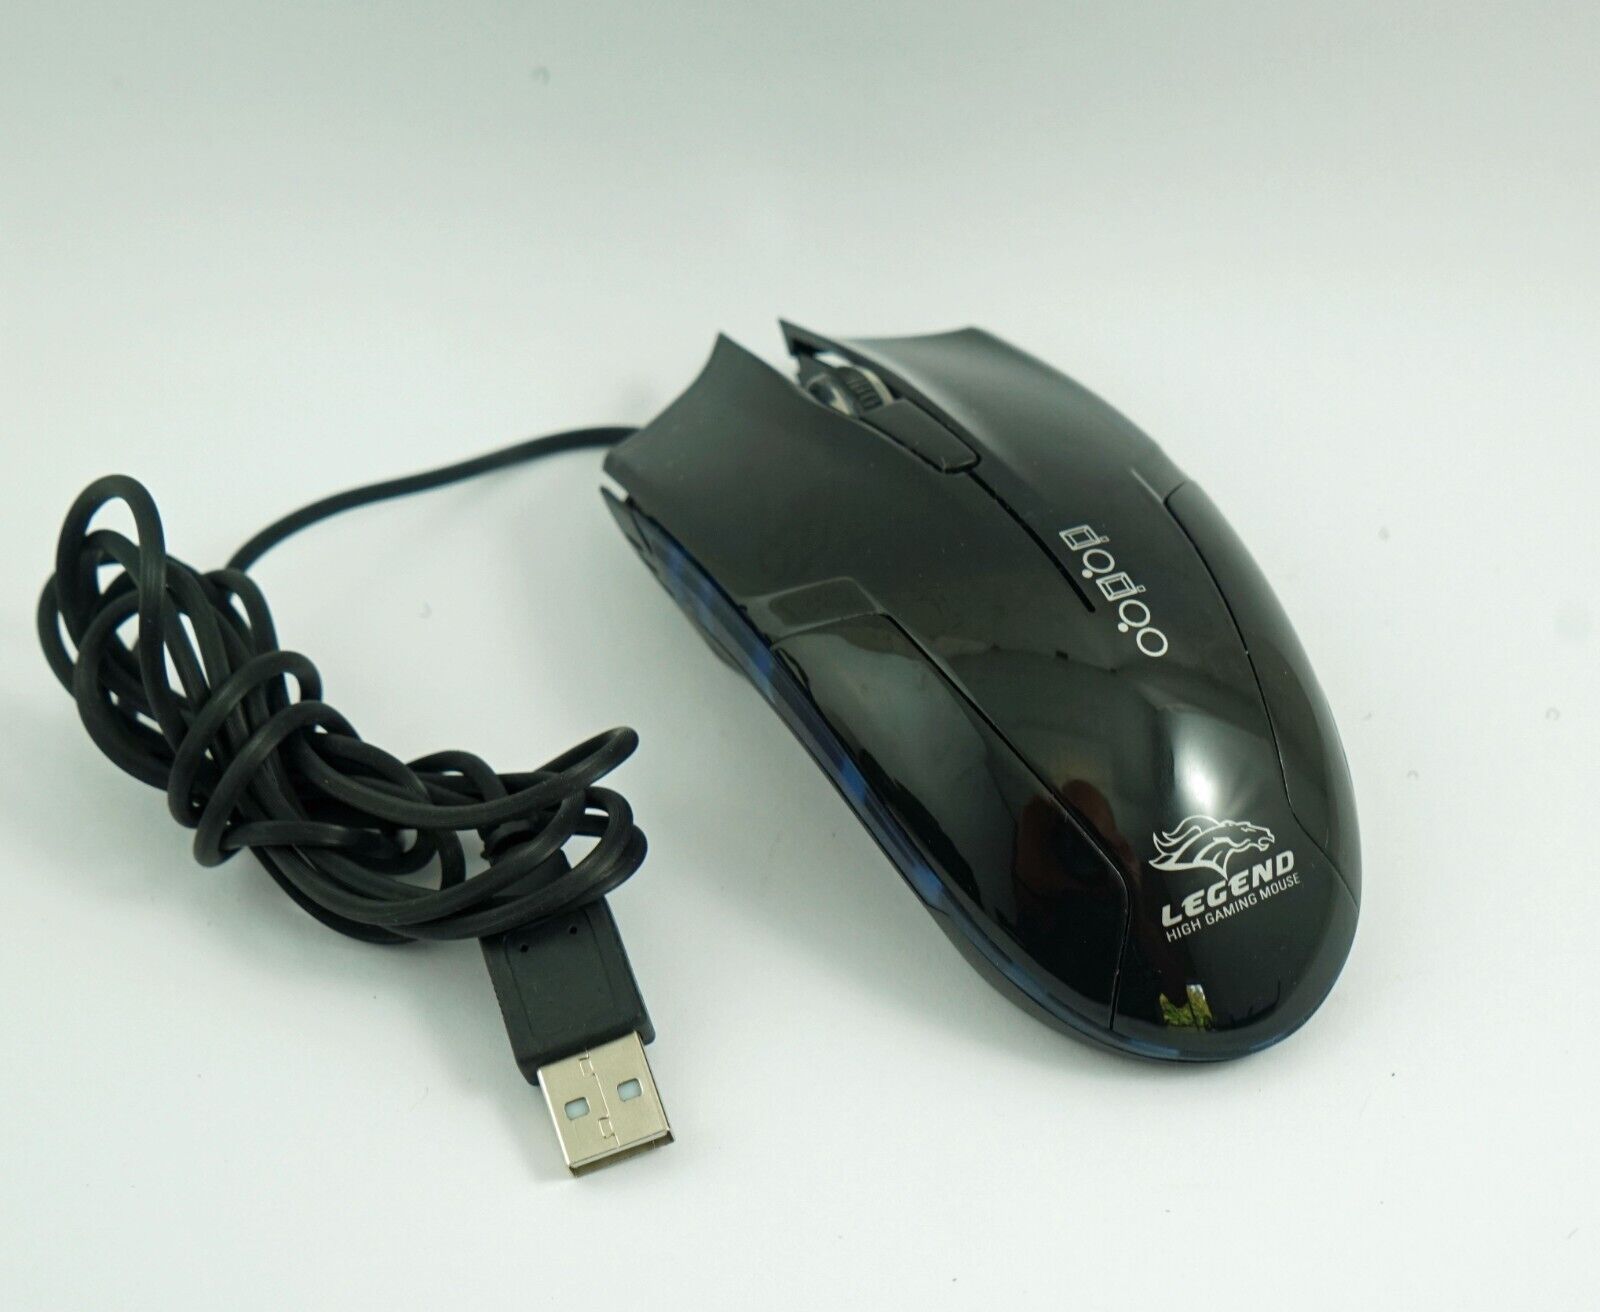 Mustang Legend Gaming Mouse Model FC-5100